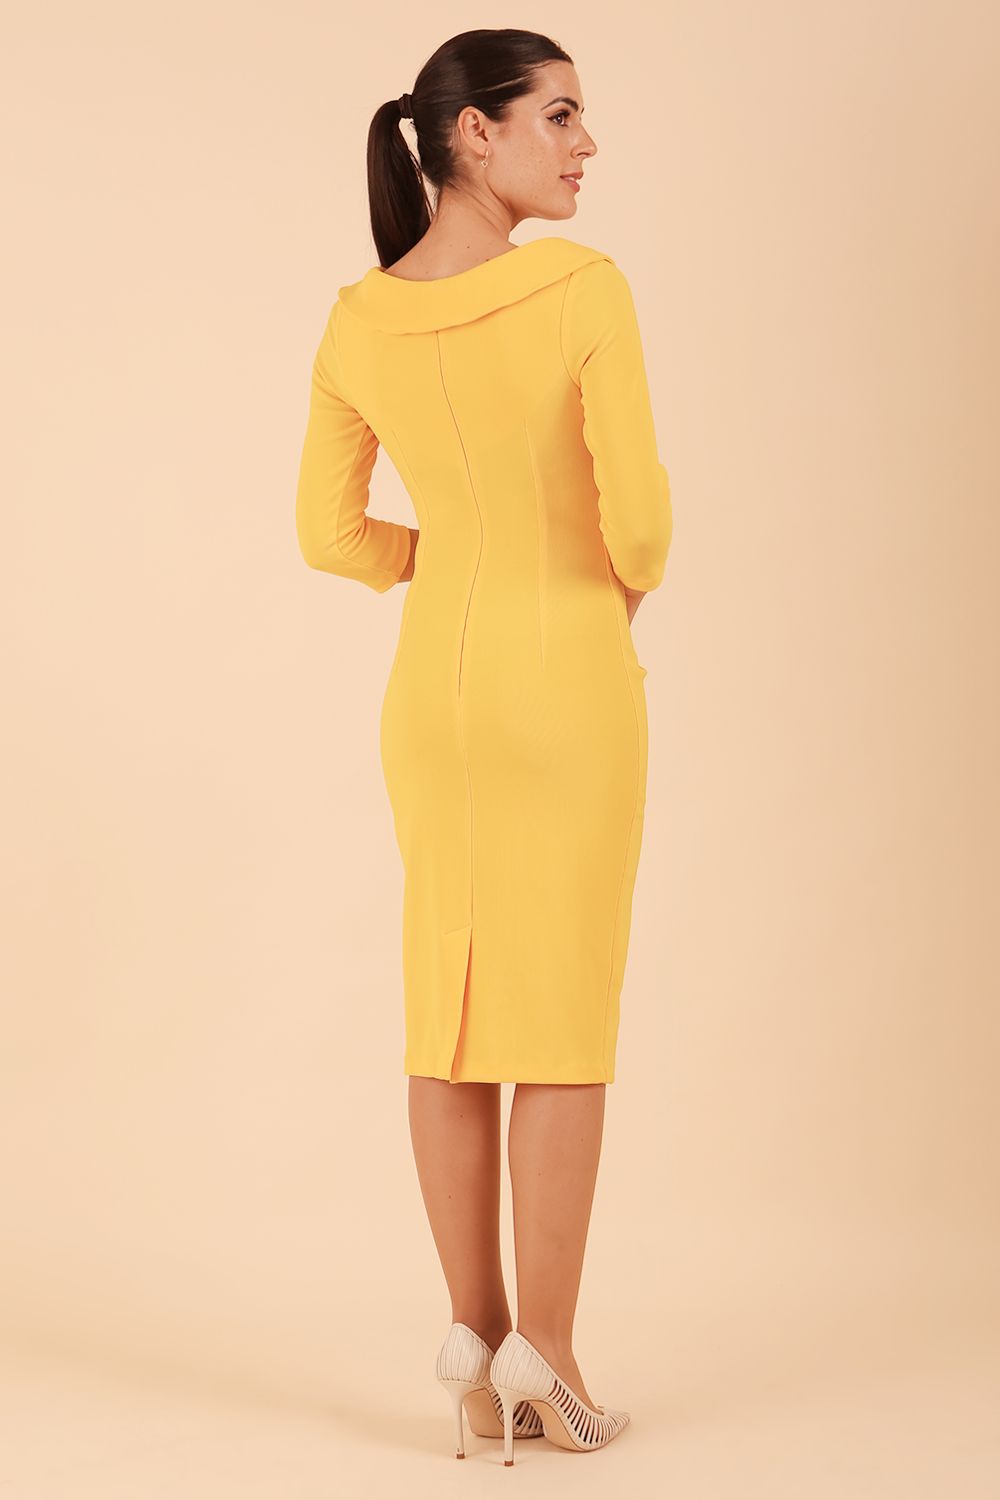 Model wearing diva catwalk Monique 3/4 Sleeve Pencil Dress with Overlapping Folded Round Neckline and 3/4 sleeves and knee length in Sunshine Yellow back